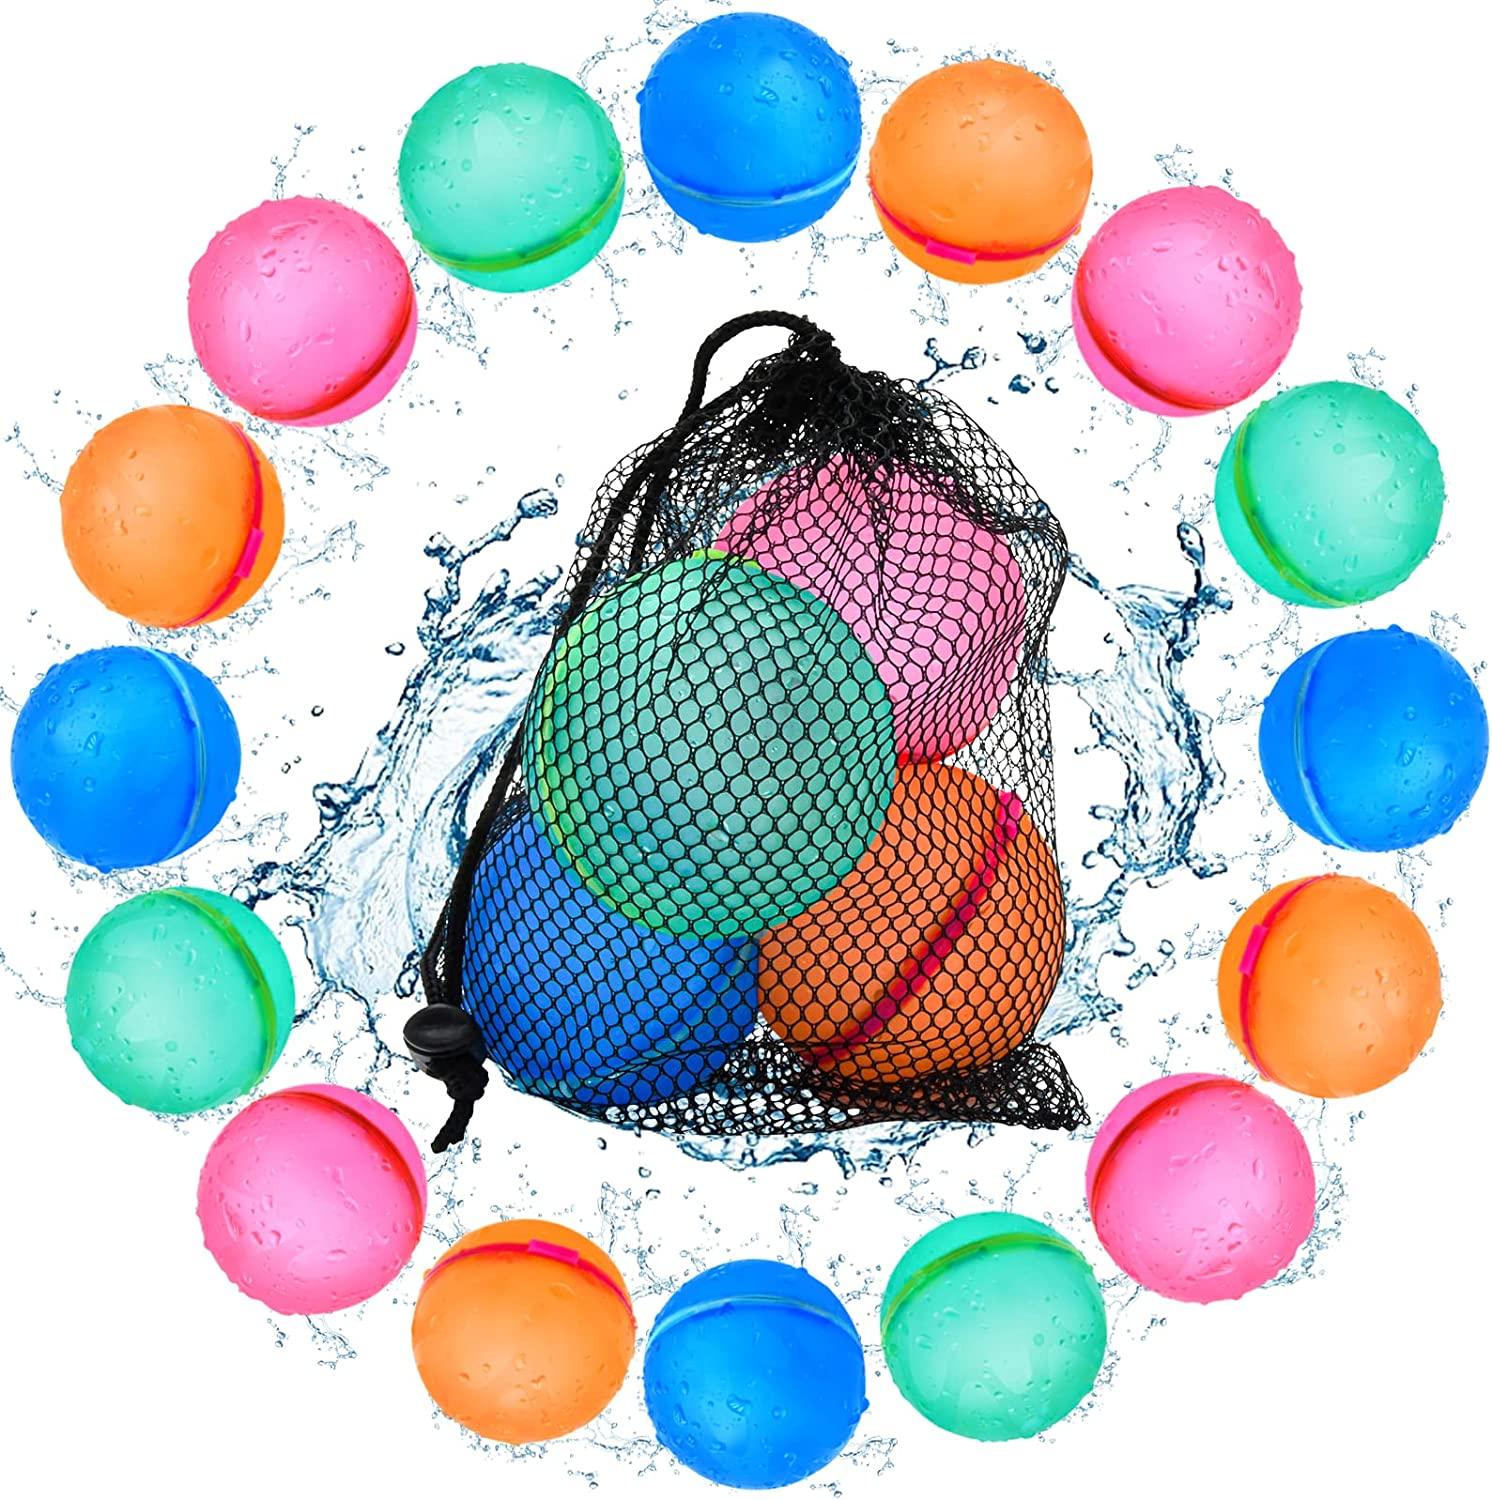 Eco-conscious water balloons for safe and fun play